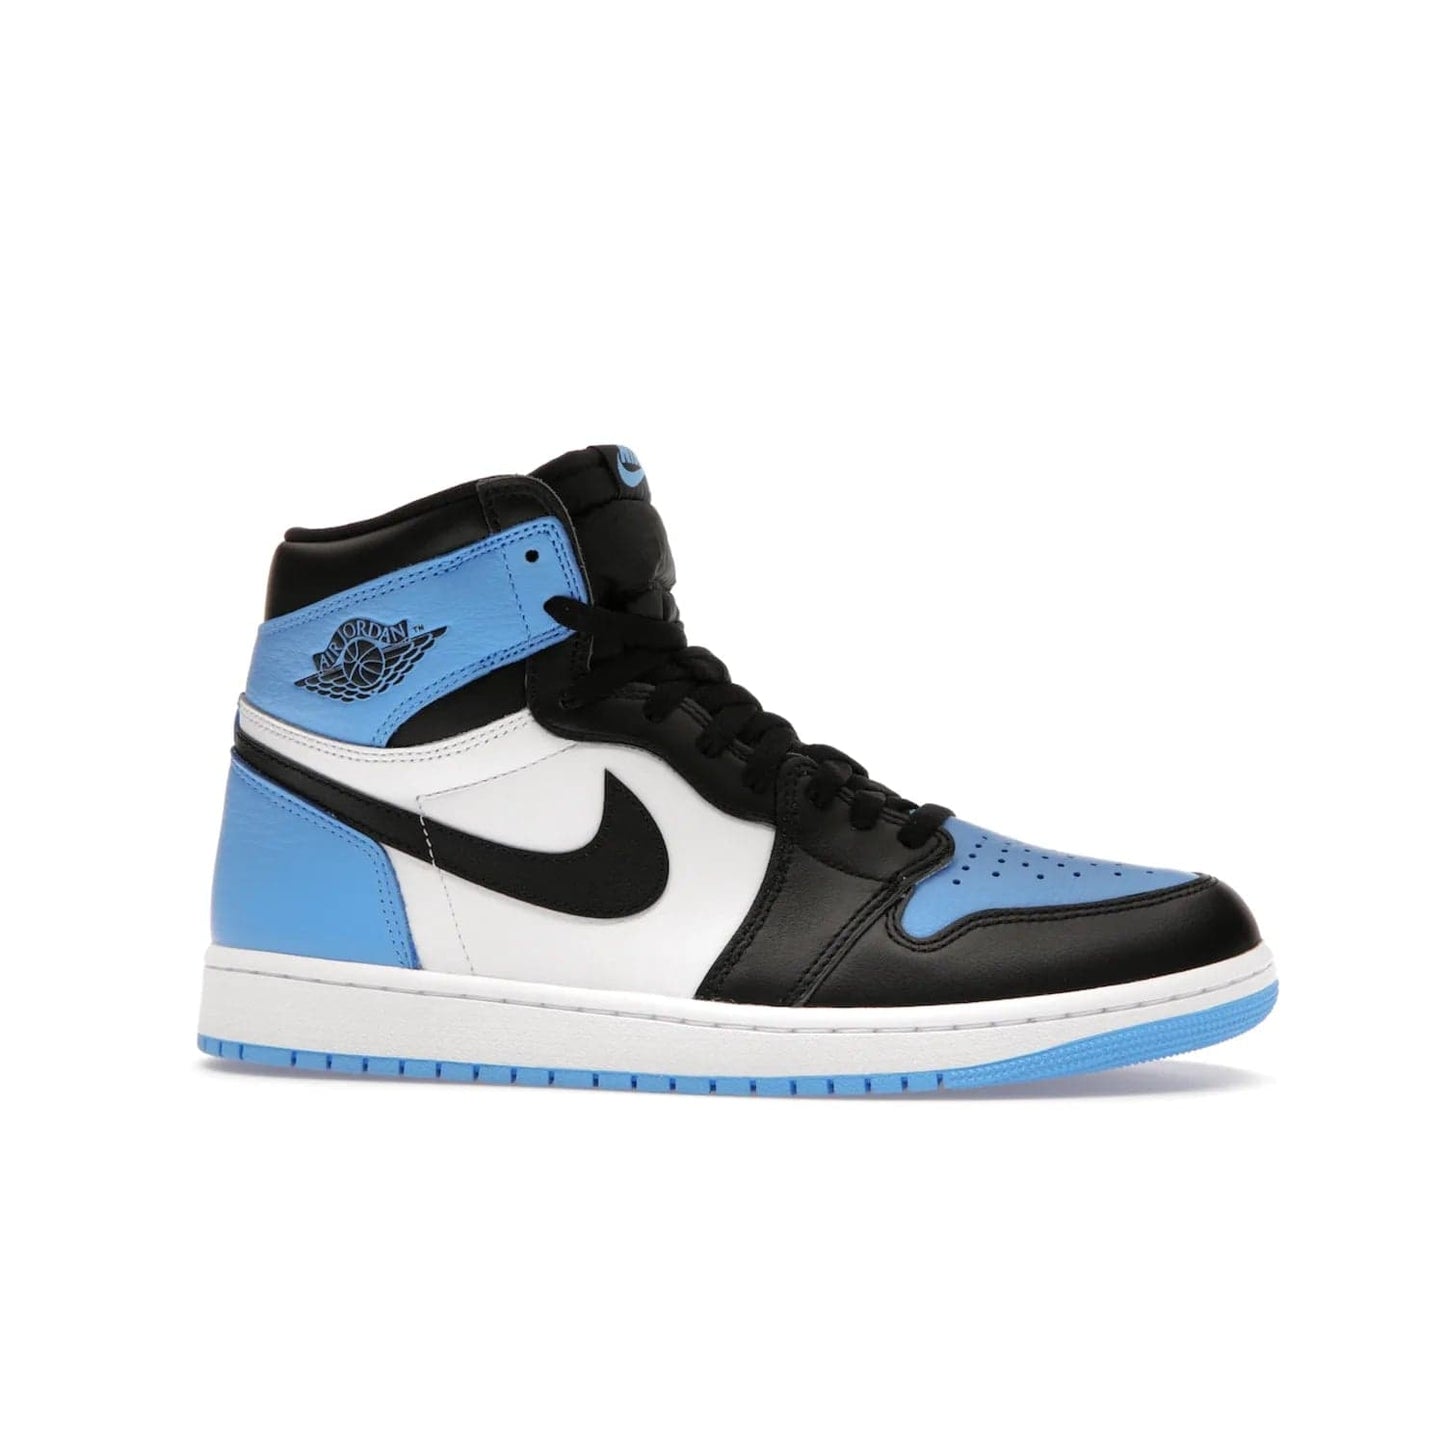 Jordan 1 Retro High OG UNC Toe - Image 2 - Only at www.BallersClubKickz.com - Jordan 1 High OG UNC Toe is a fashionable, high-quality sneaker featuring University Blue, Black White and White. Releasing July 22, 2023, it's the perfect pick up for sneakerheads.